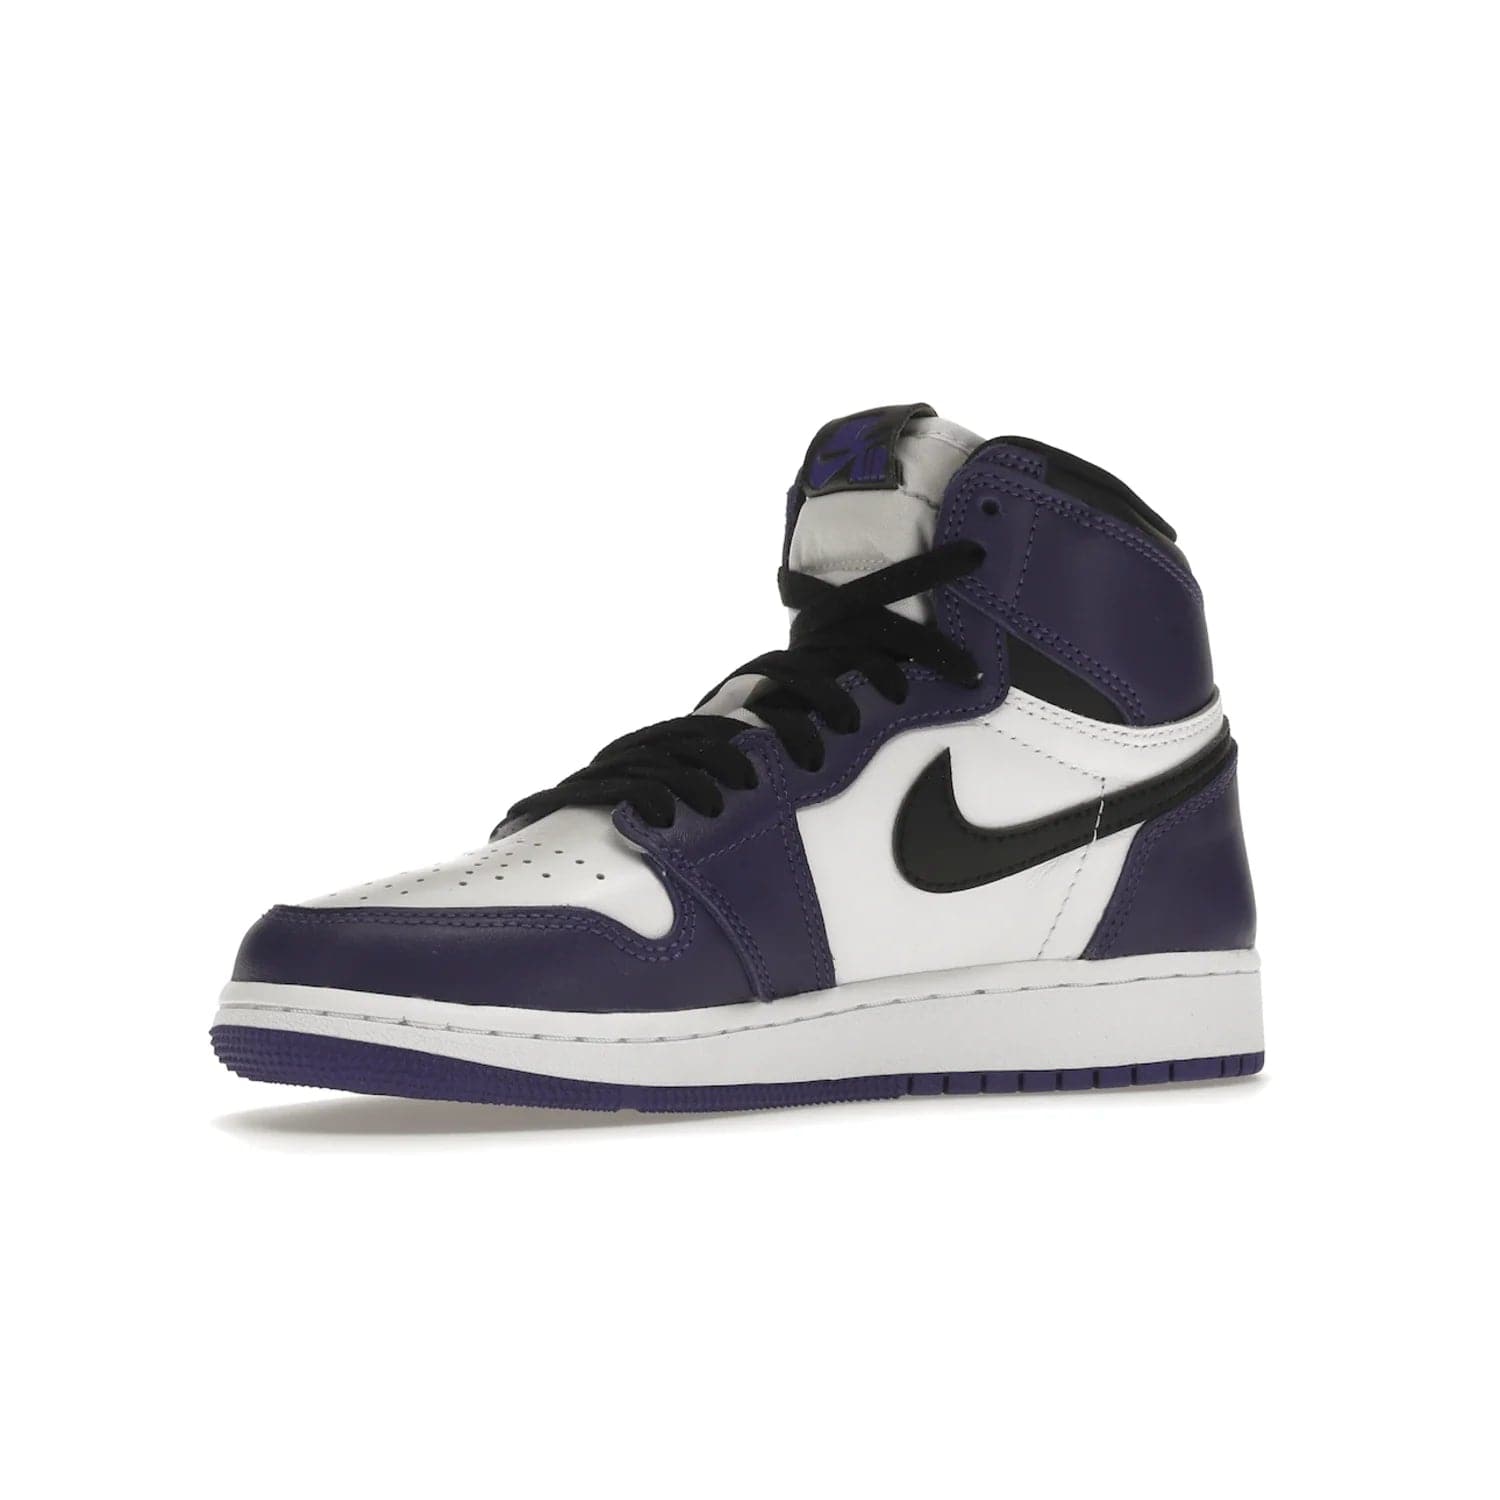 Jordan 1 Retro High Court Purple White (GS) - Image 16 - Only at www.BallersClubKickz.com - The Air Jordan 1 Retro High Court Purple is here and young sneaker heads can show off classic style. Features a white tumbled leather upper, black swoosh, purple overlays, black collar with purple overlay, white tongue, black patch with purple Nike Air logo and swoosh, white midsole, and purple rubber outsole with circular pattern.